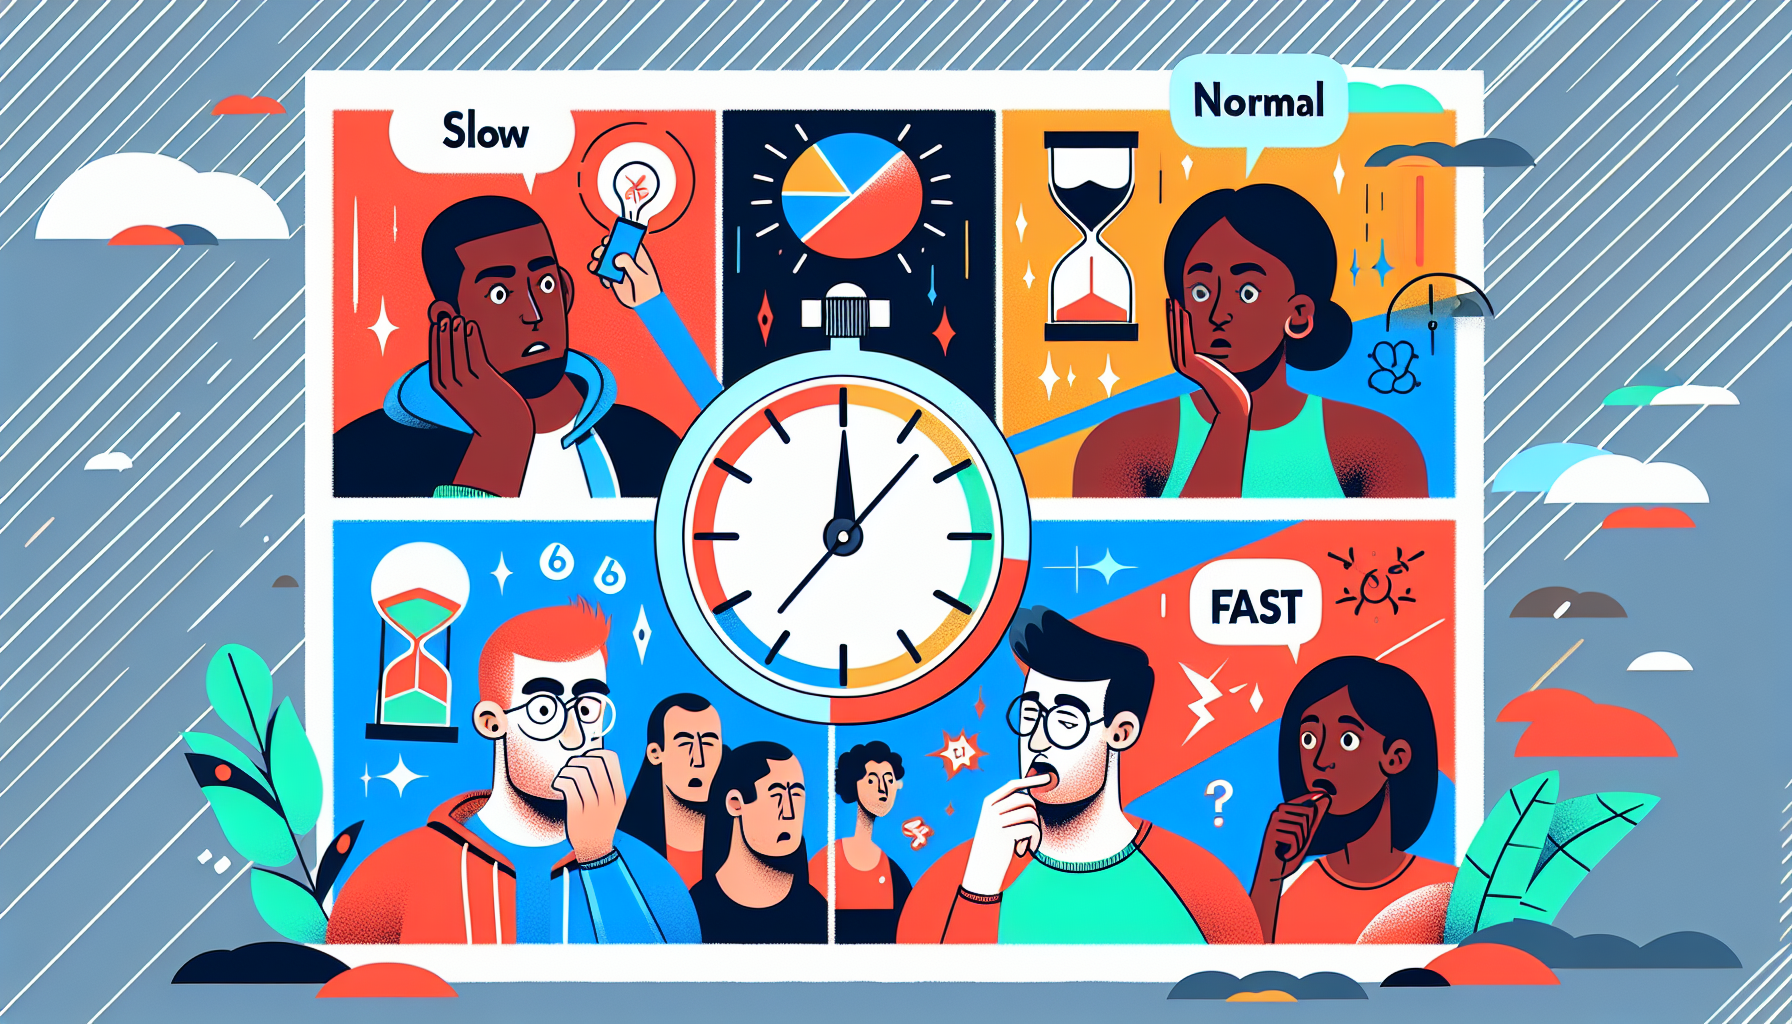 Illustrate a modern, colorful image showing the concept of pacing in animation, which is key to keeping viewers engaged. This could take the form of a multi-panel comic strip, with each panel representing a different speed of animation (e.g. slow, normal, fast). The visuals could include a stylized stopwatch or an hourglass to symbolize time, without any text. Include diverse human characters in various stages of emotive responses in each panel that reflect their level of engagement in watching the animation: for example, a Caucasian man showing boredom, a Black woman looking intrigued and a Hispanic child showing extreme excitement. This will help to visually depict how the pace of animation affects viewer engagement.